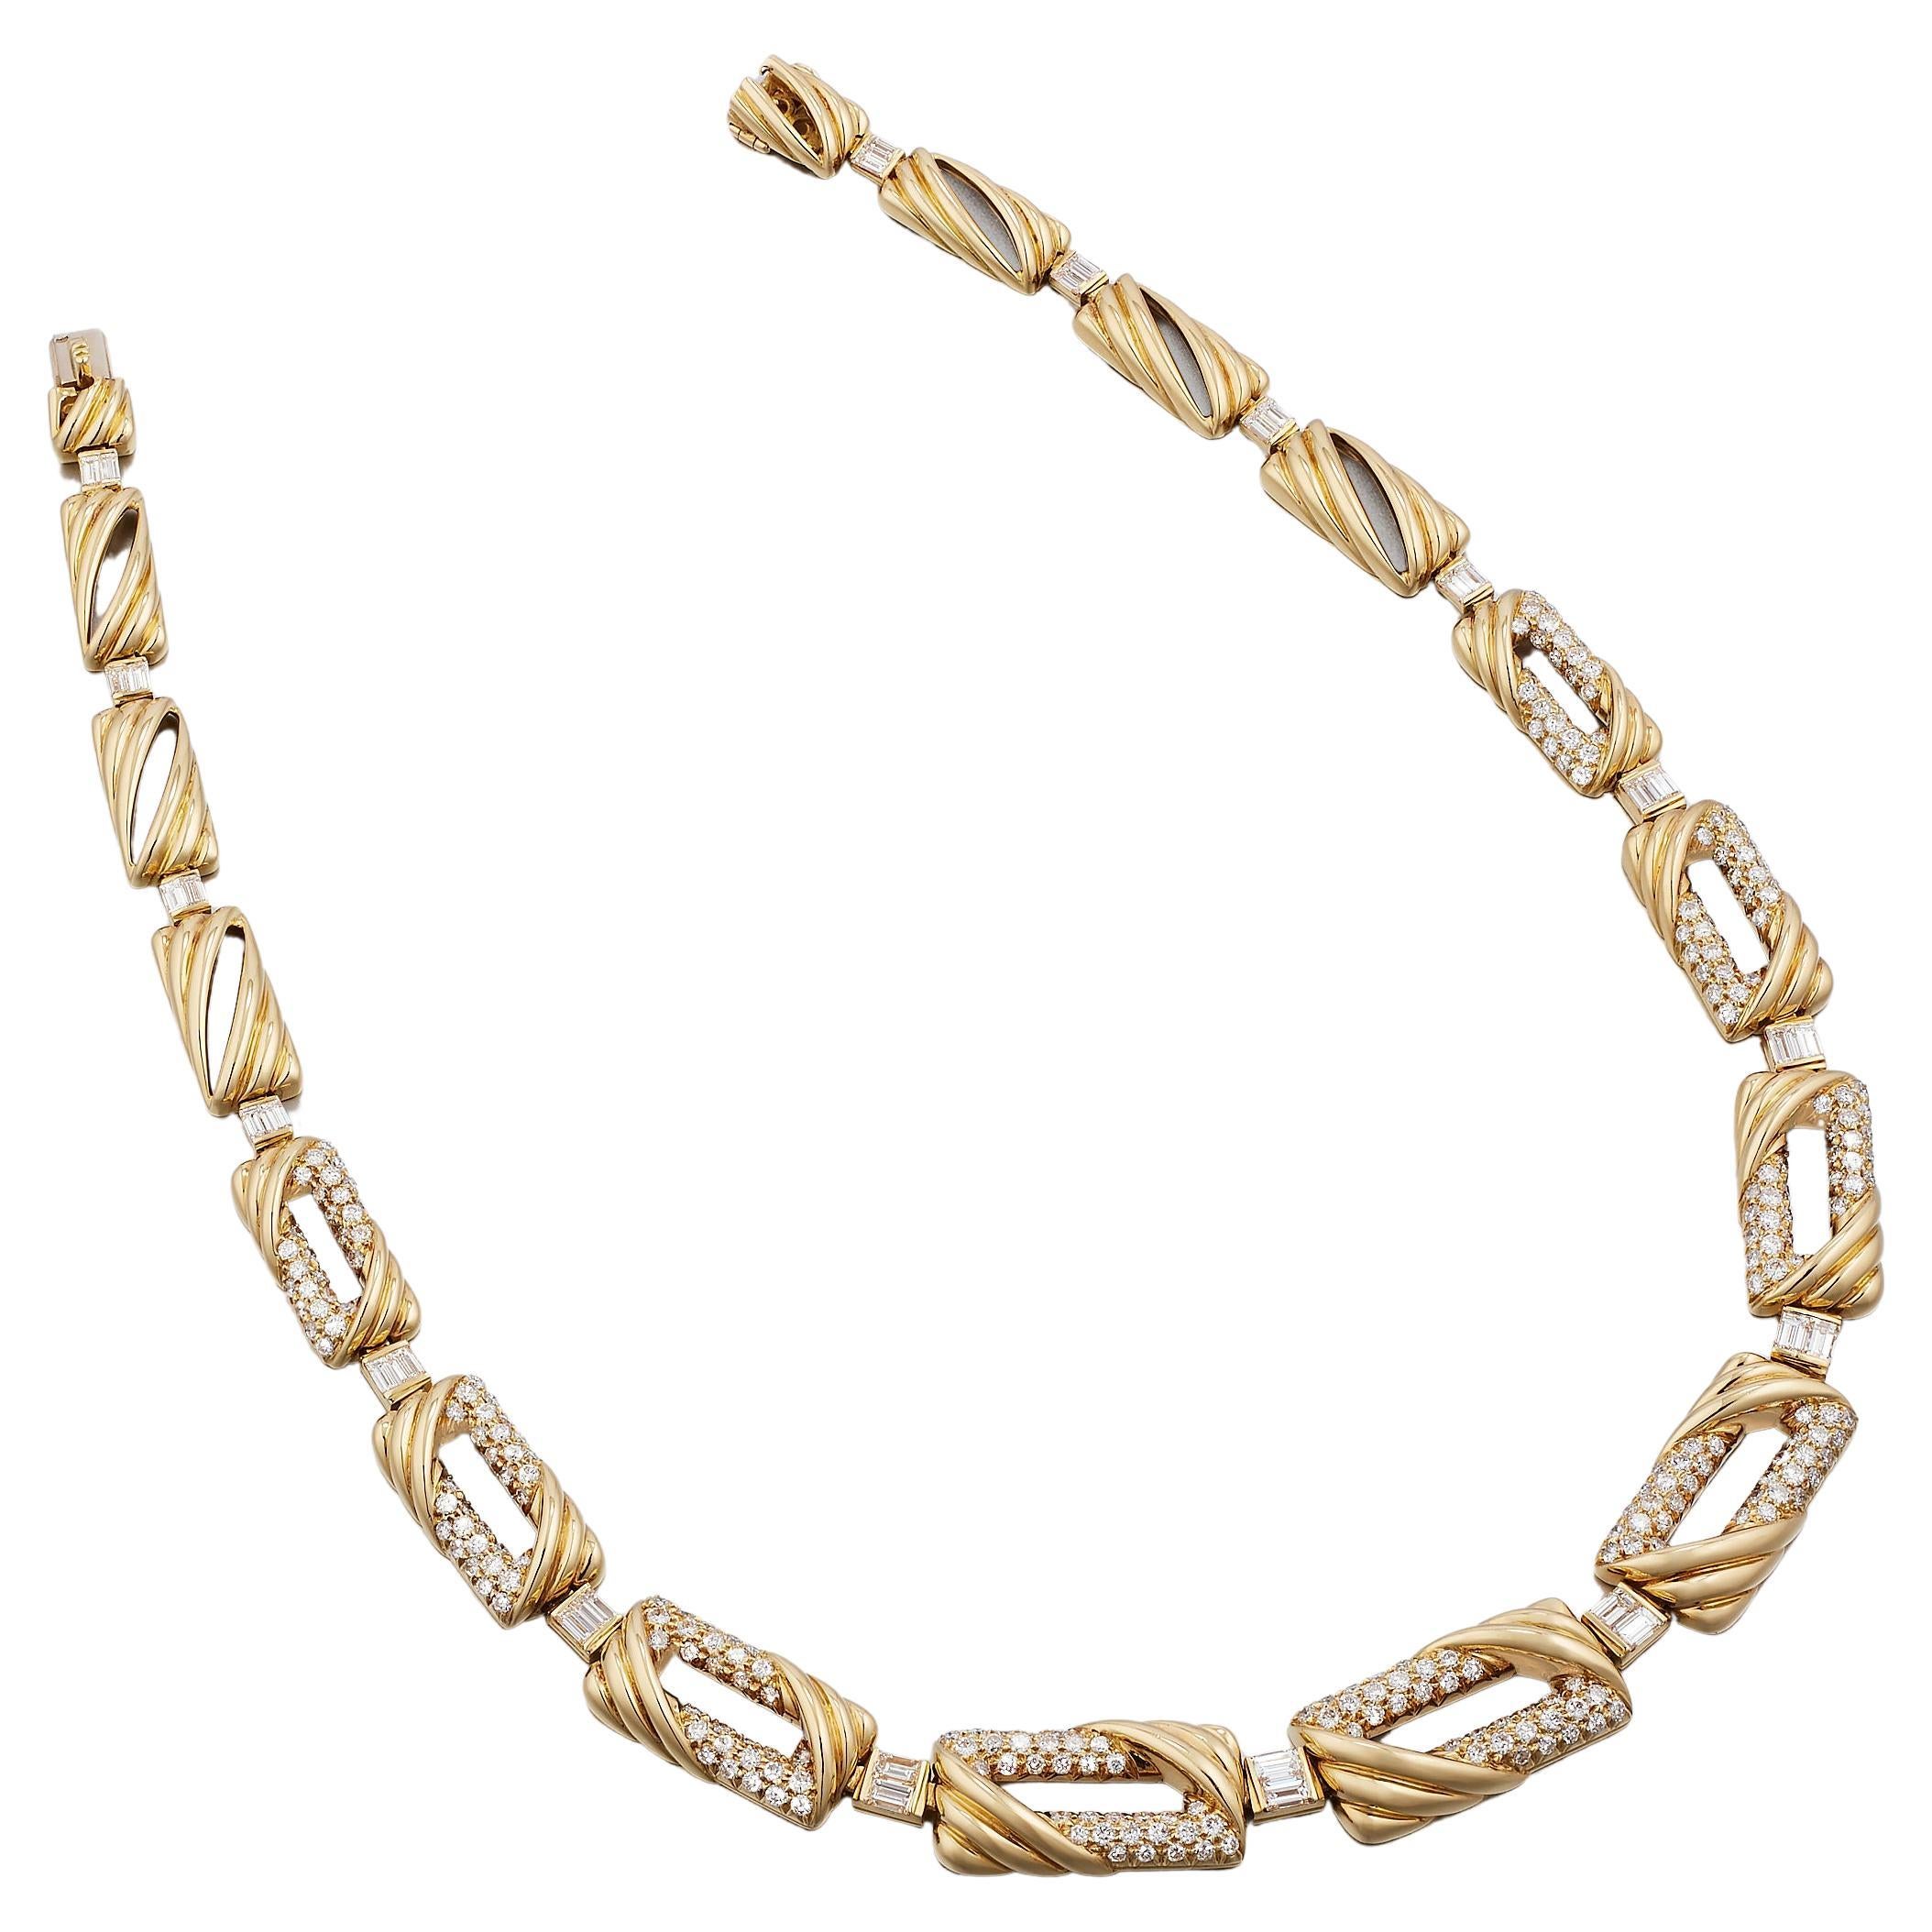 Mauboussin Paris Vintage 12cts Diamond Necklace in 18K Yellow Gold  